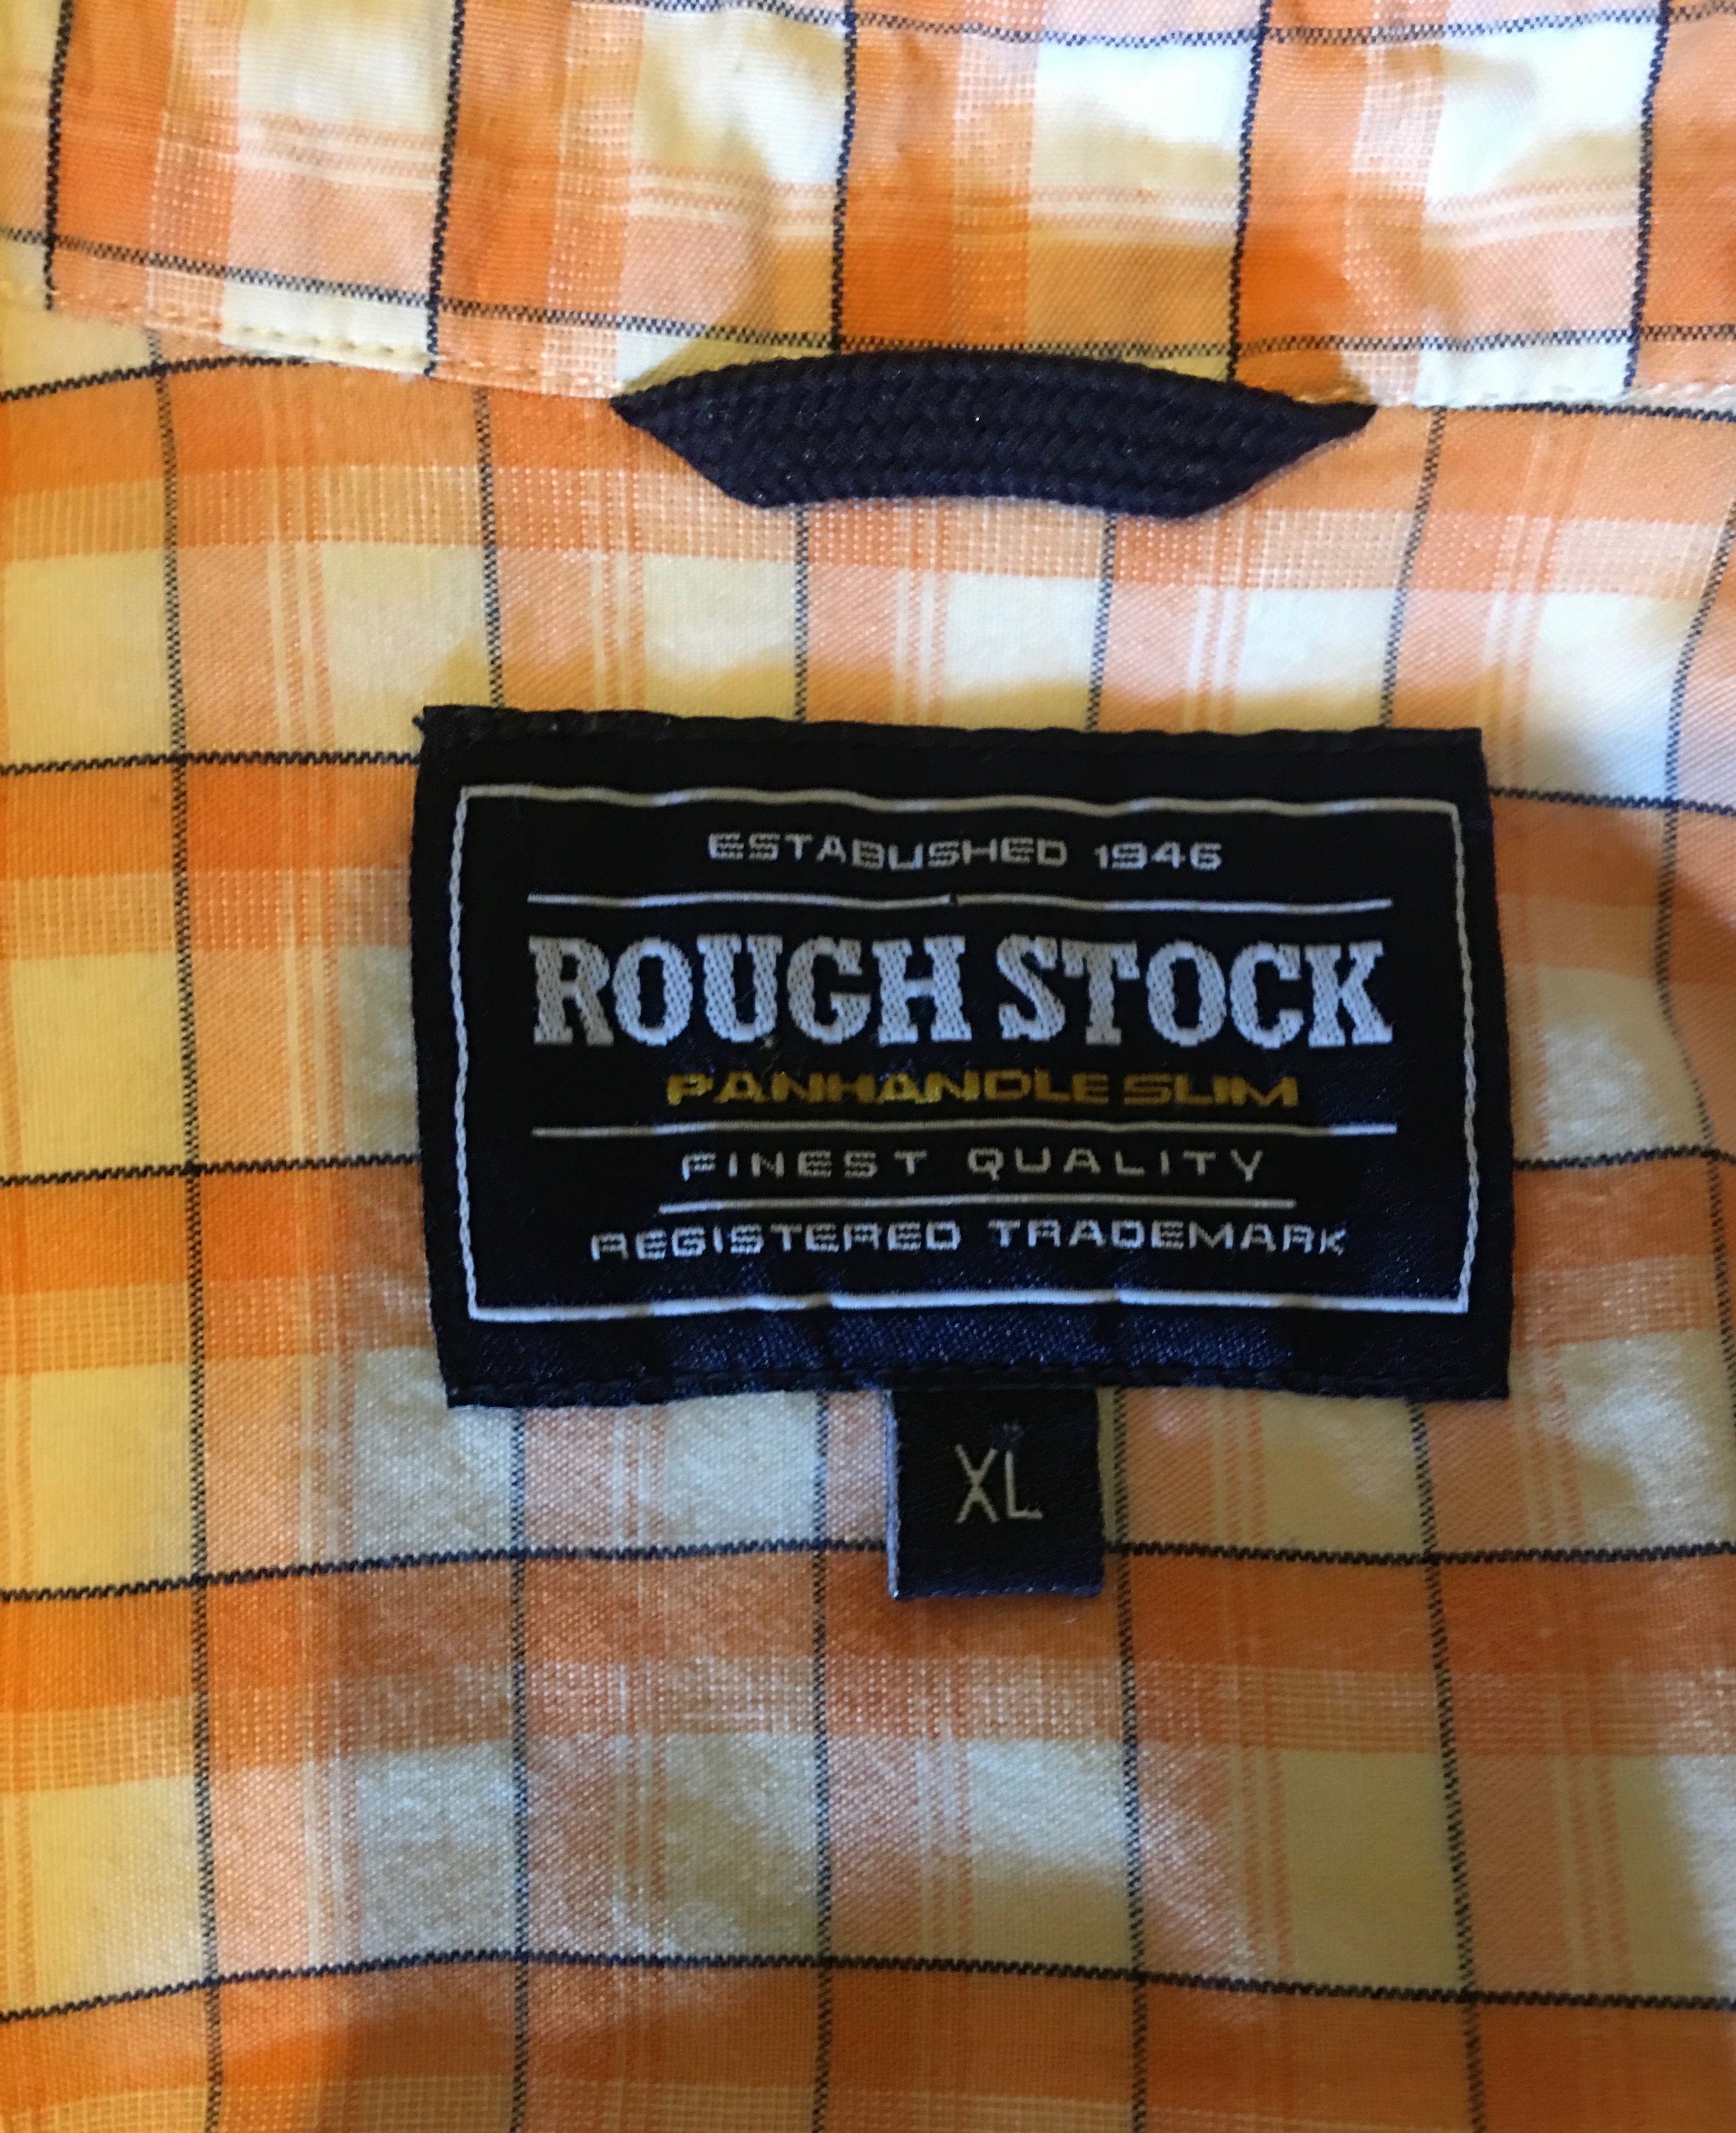 Silver Coconut » RoughStock “Panhandle Slim” Button Down Long Sleeve Shirt